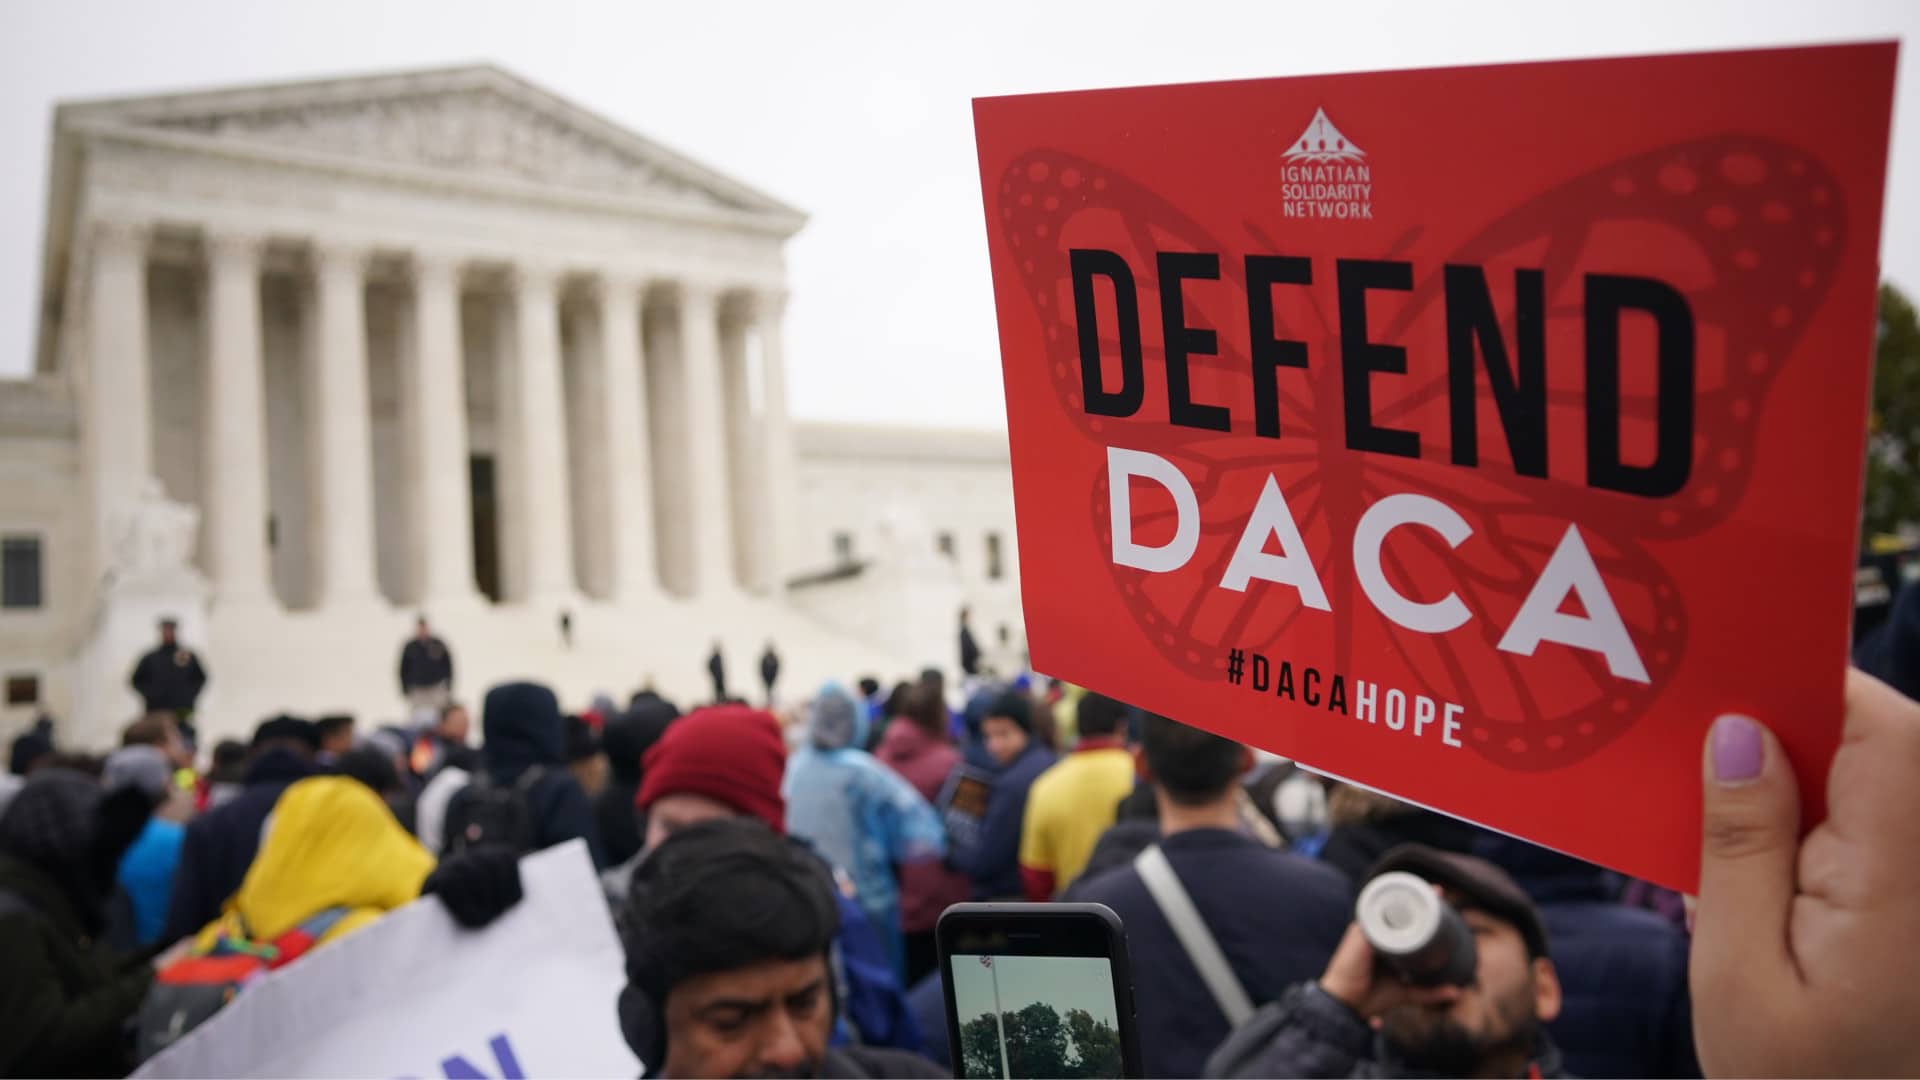 Immigration rights activists take part in a rally in front of the U.S. Supreme Court in Washington, DC on November 12, 2019.